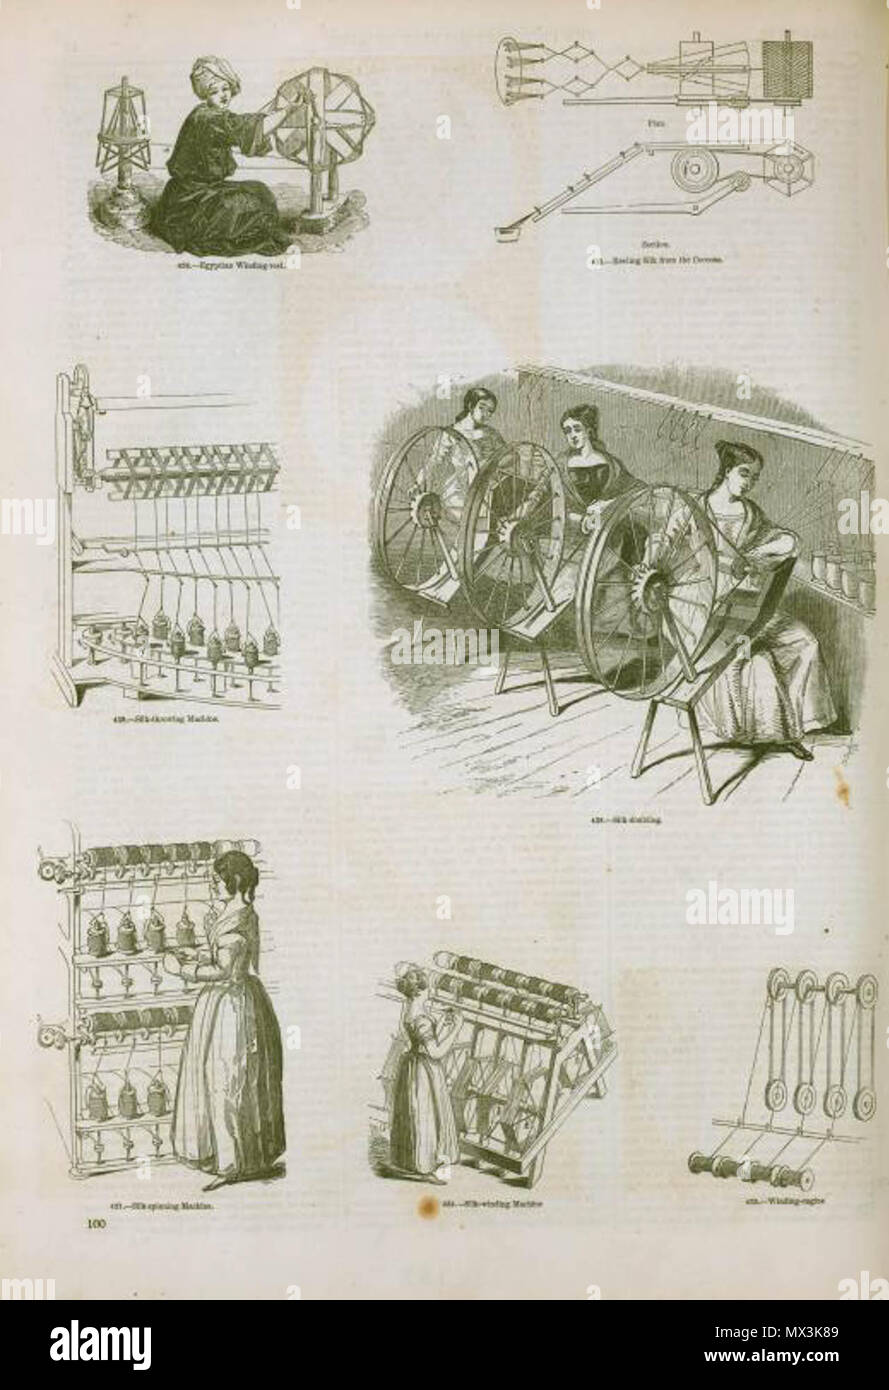 An illustration of spinning, winding, doubling and throwing machines used in silk textile production in England, 1858. Stock Photo